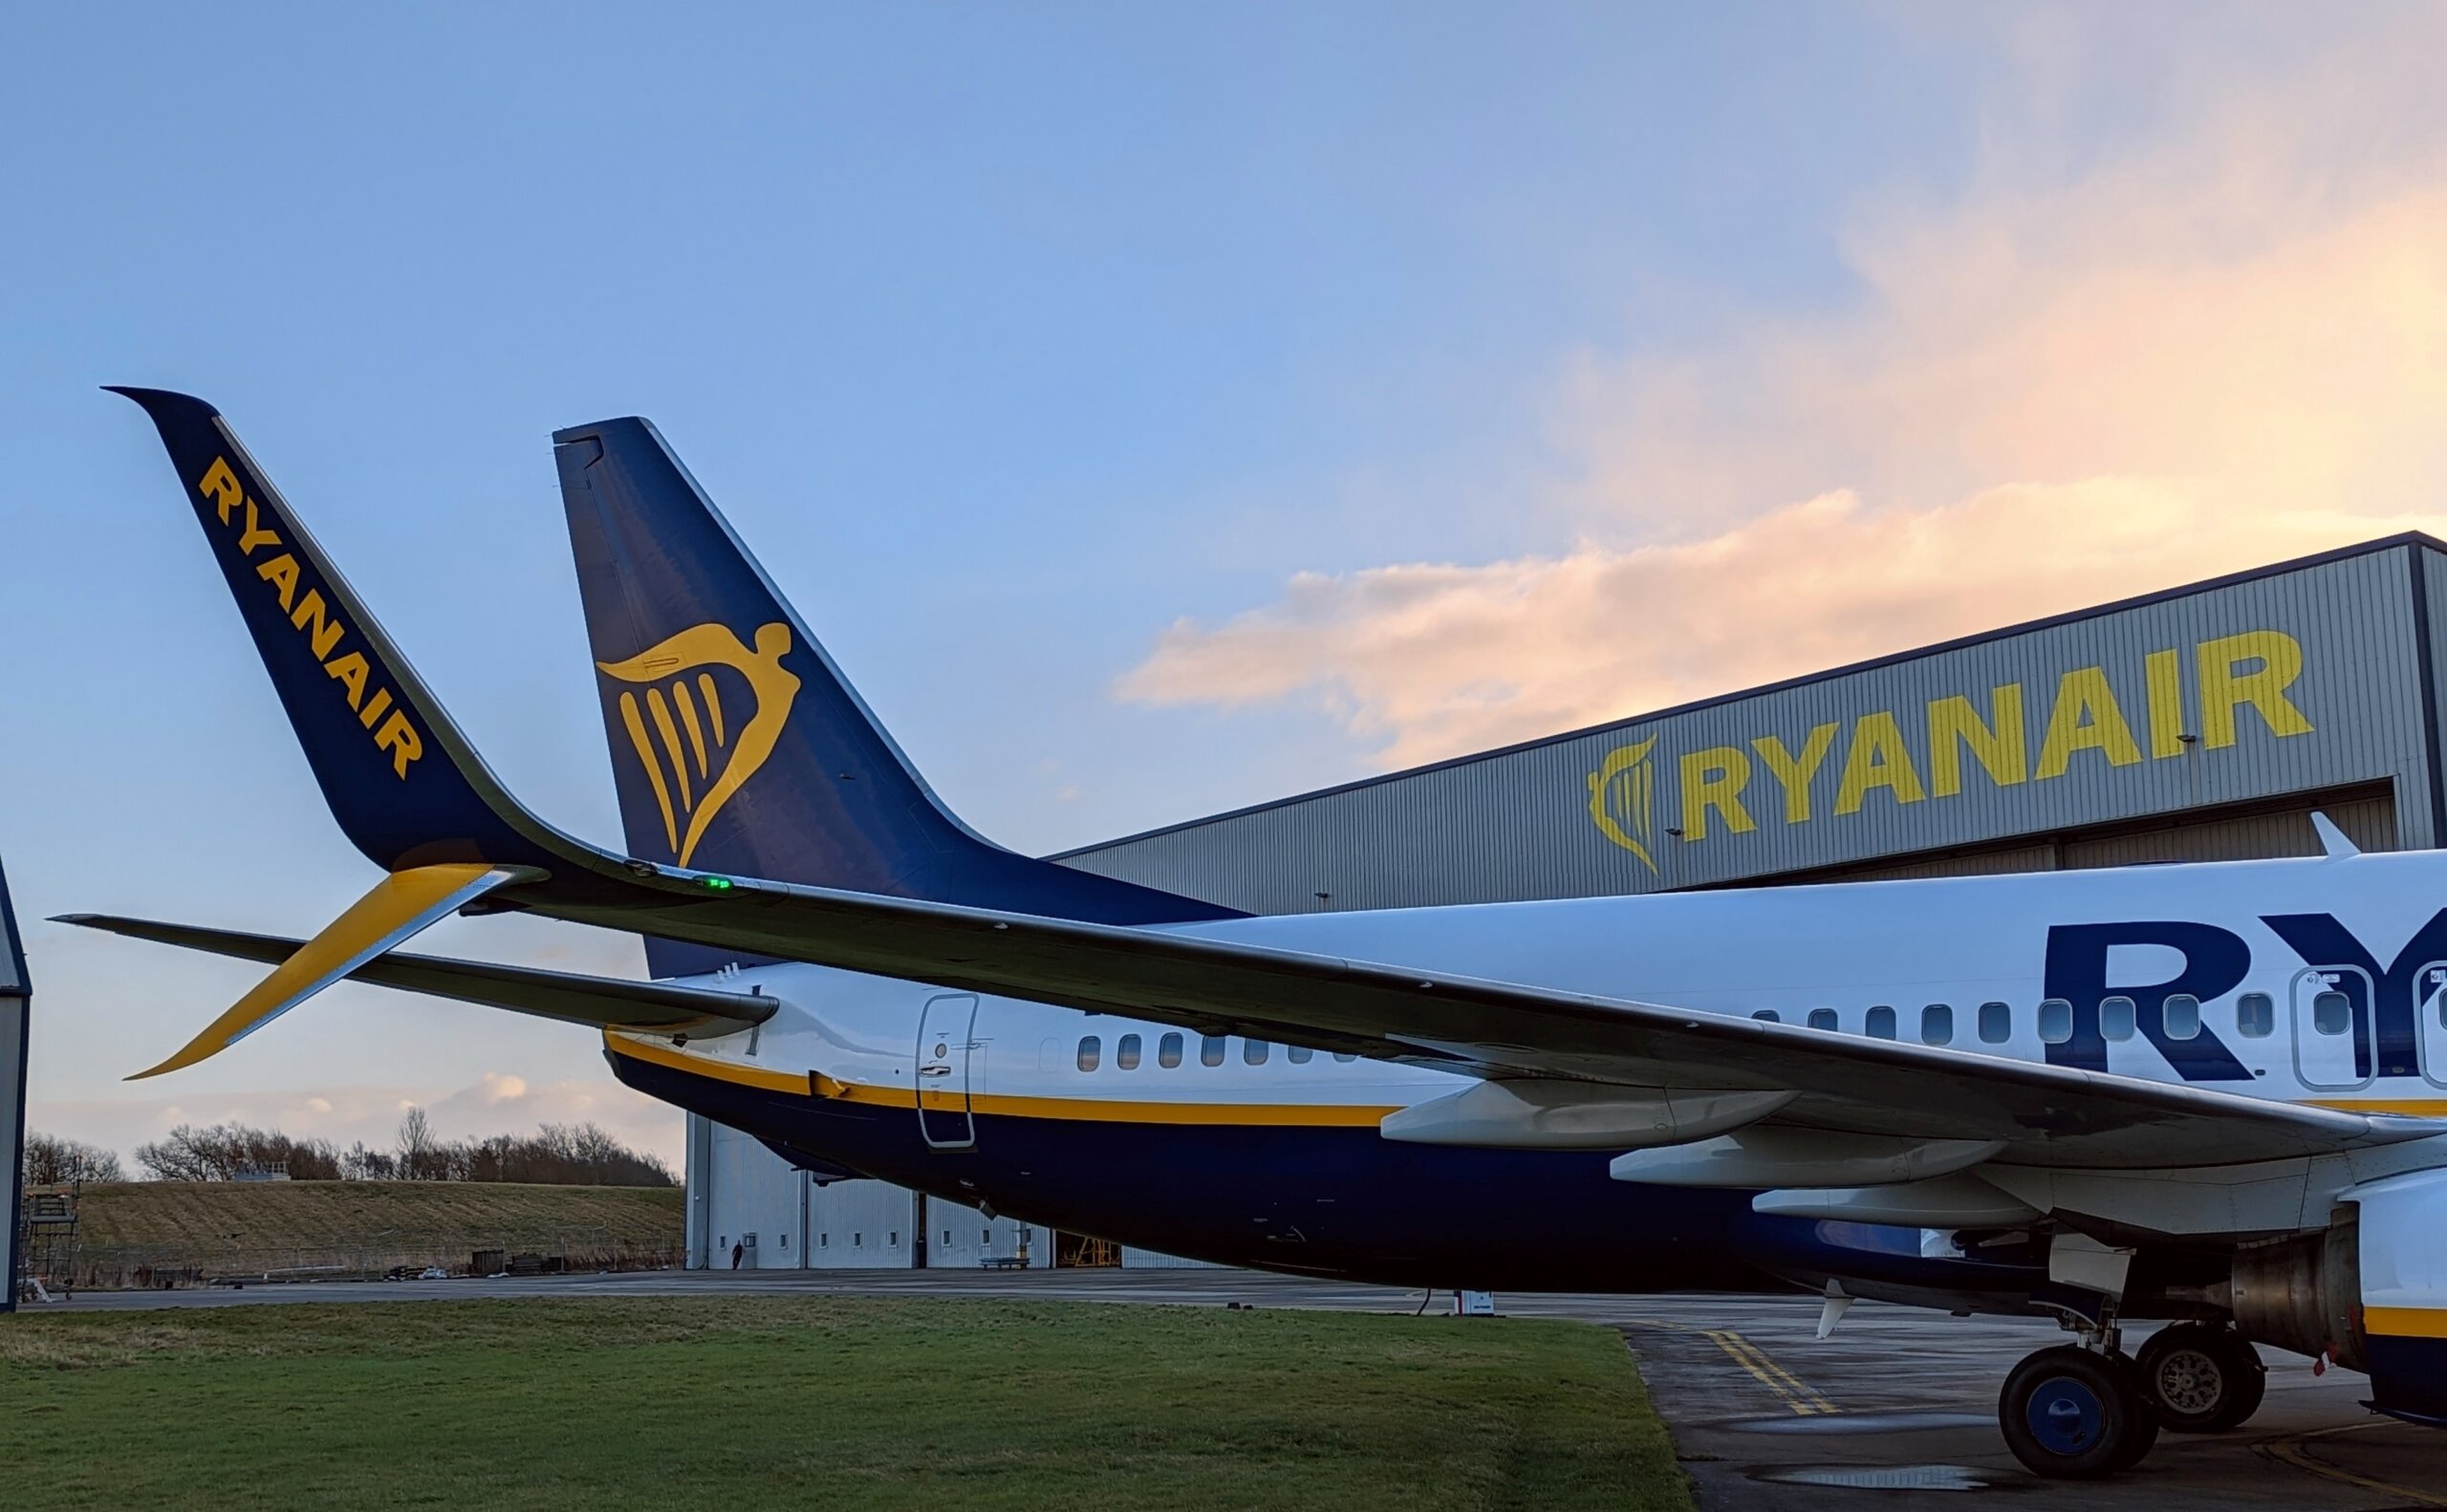 RYANAIR CUTS CARBON EMISSIONS BY 165,000 TONNES WITH WINGLET RETROFIT